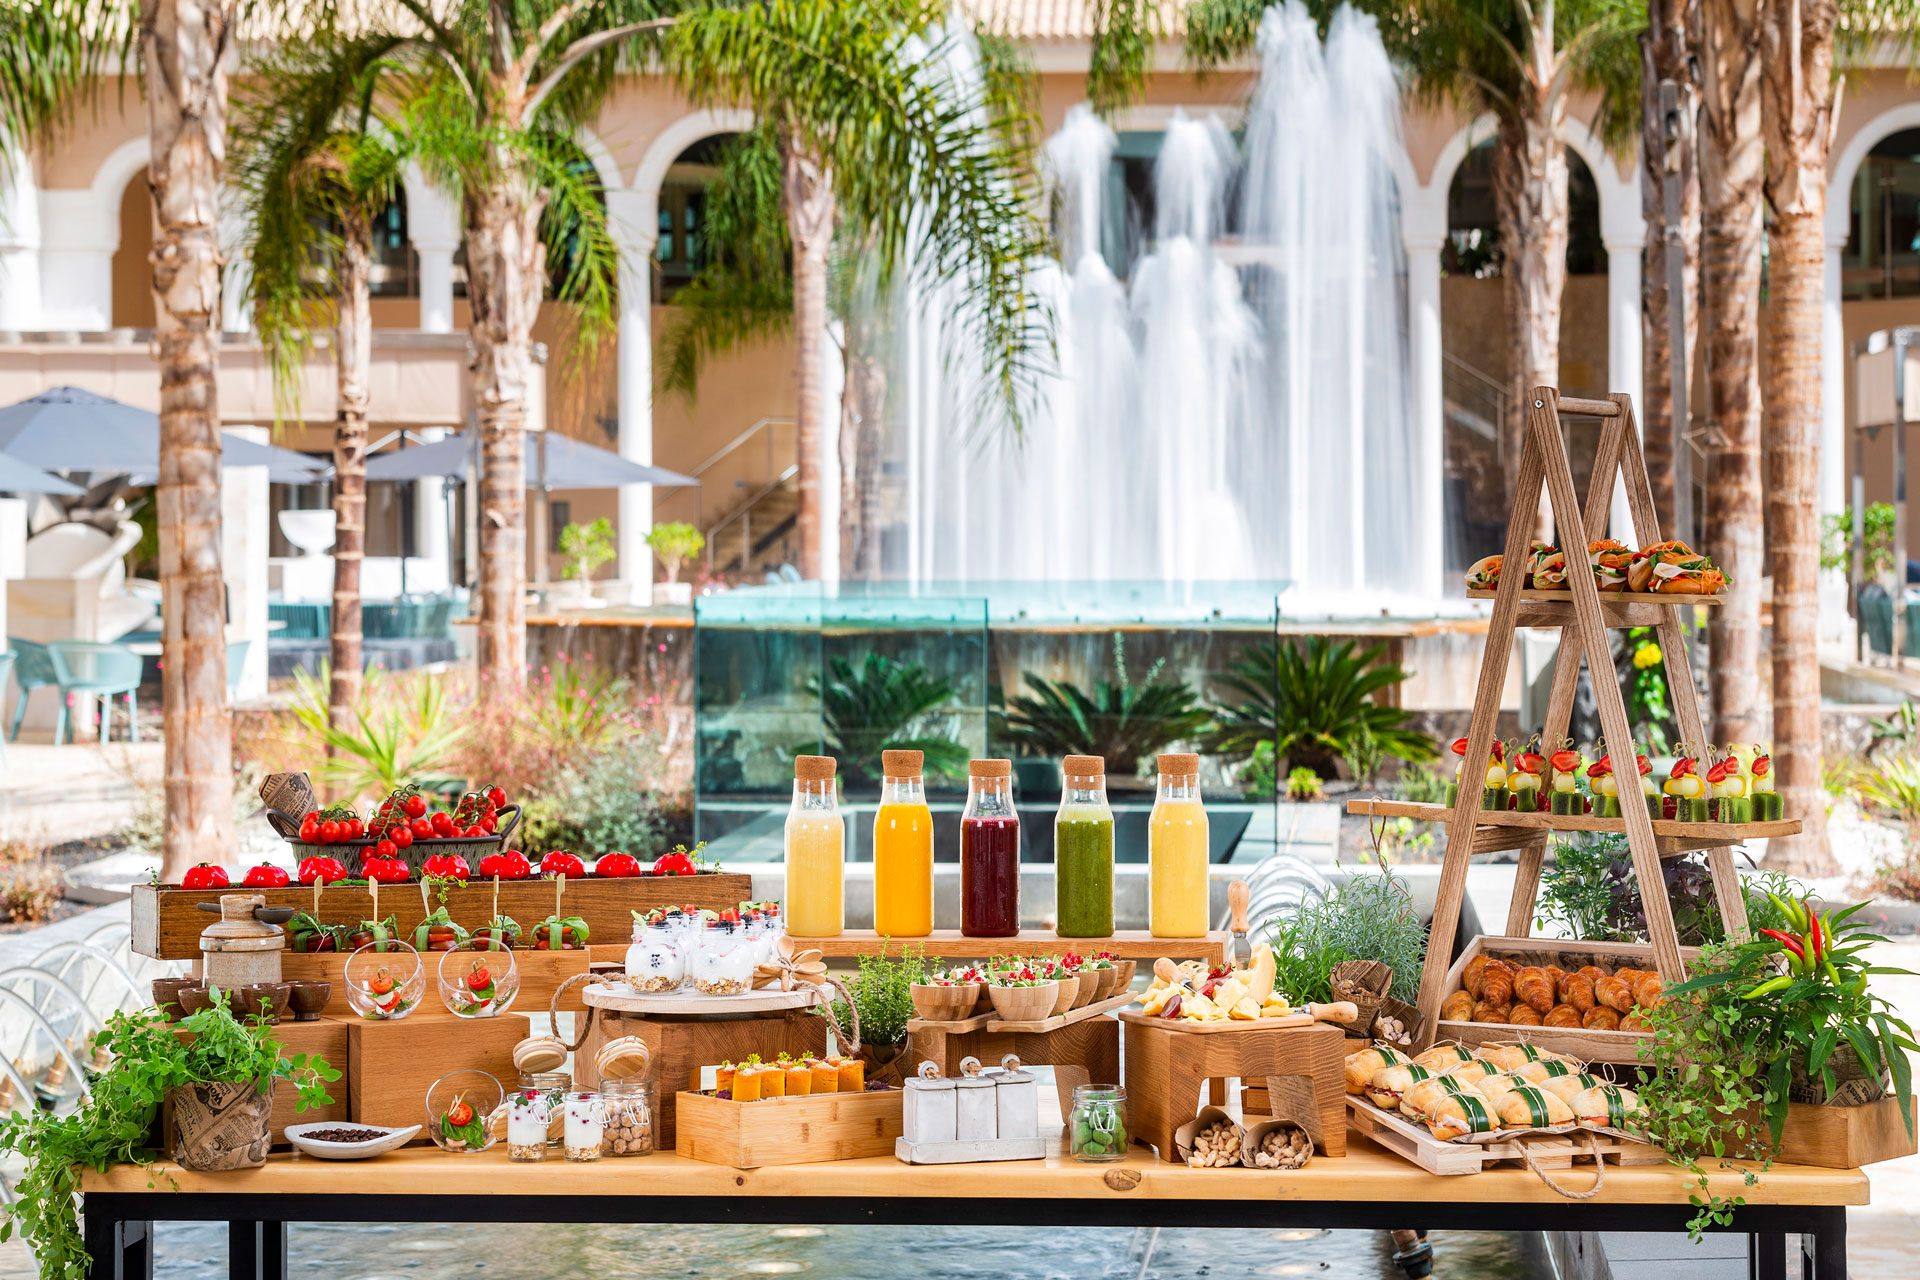 breakfast banquet with colorful juices and waterfall fixture in the background